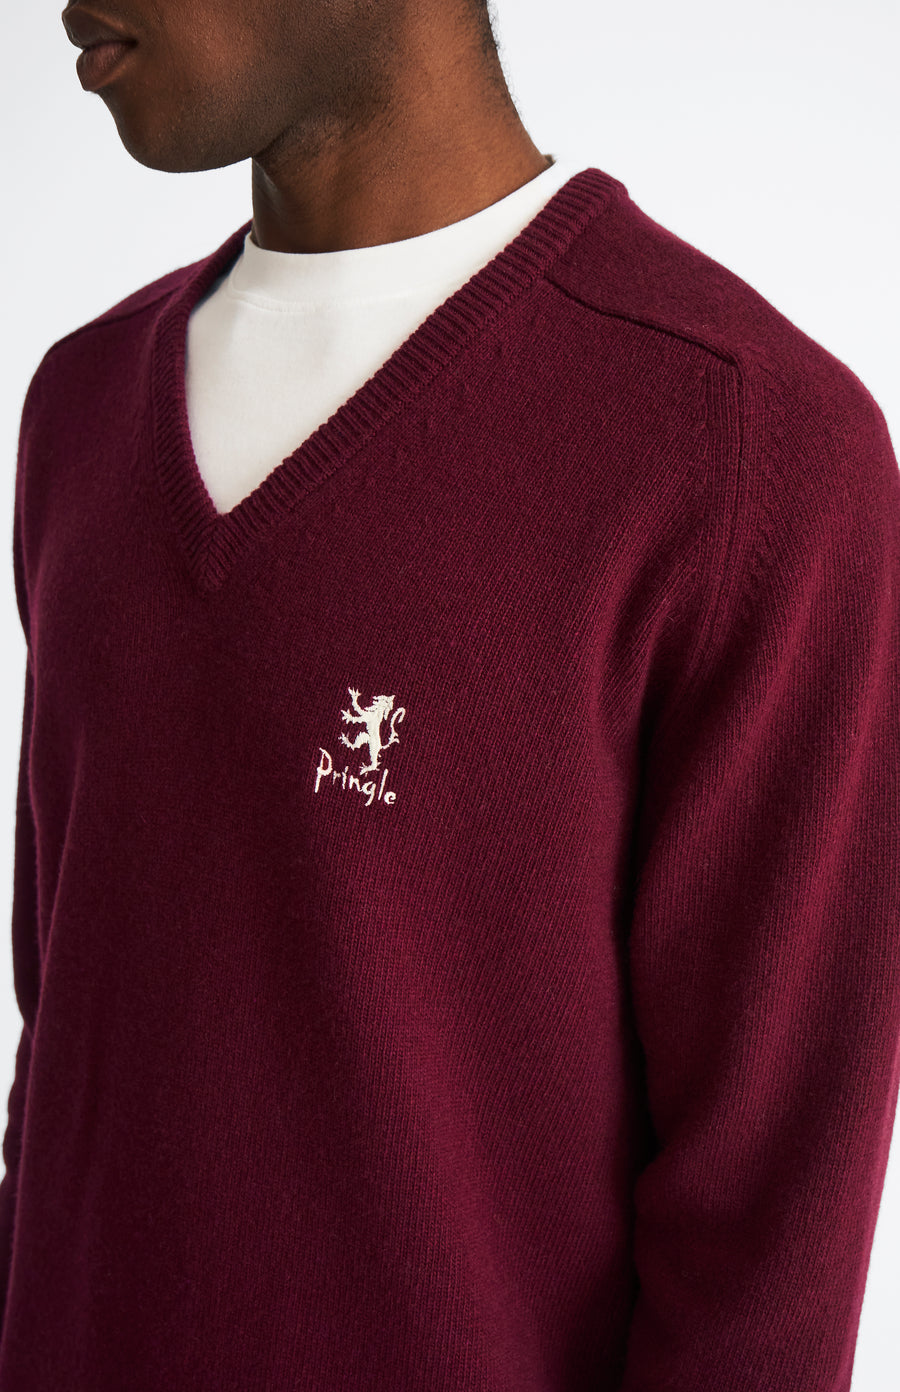 Pringle of Scotland Archive Men's V neck Lambswool Jumper In Claret showing embroidery